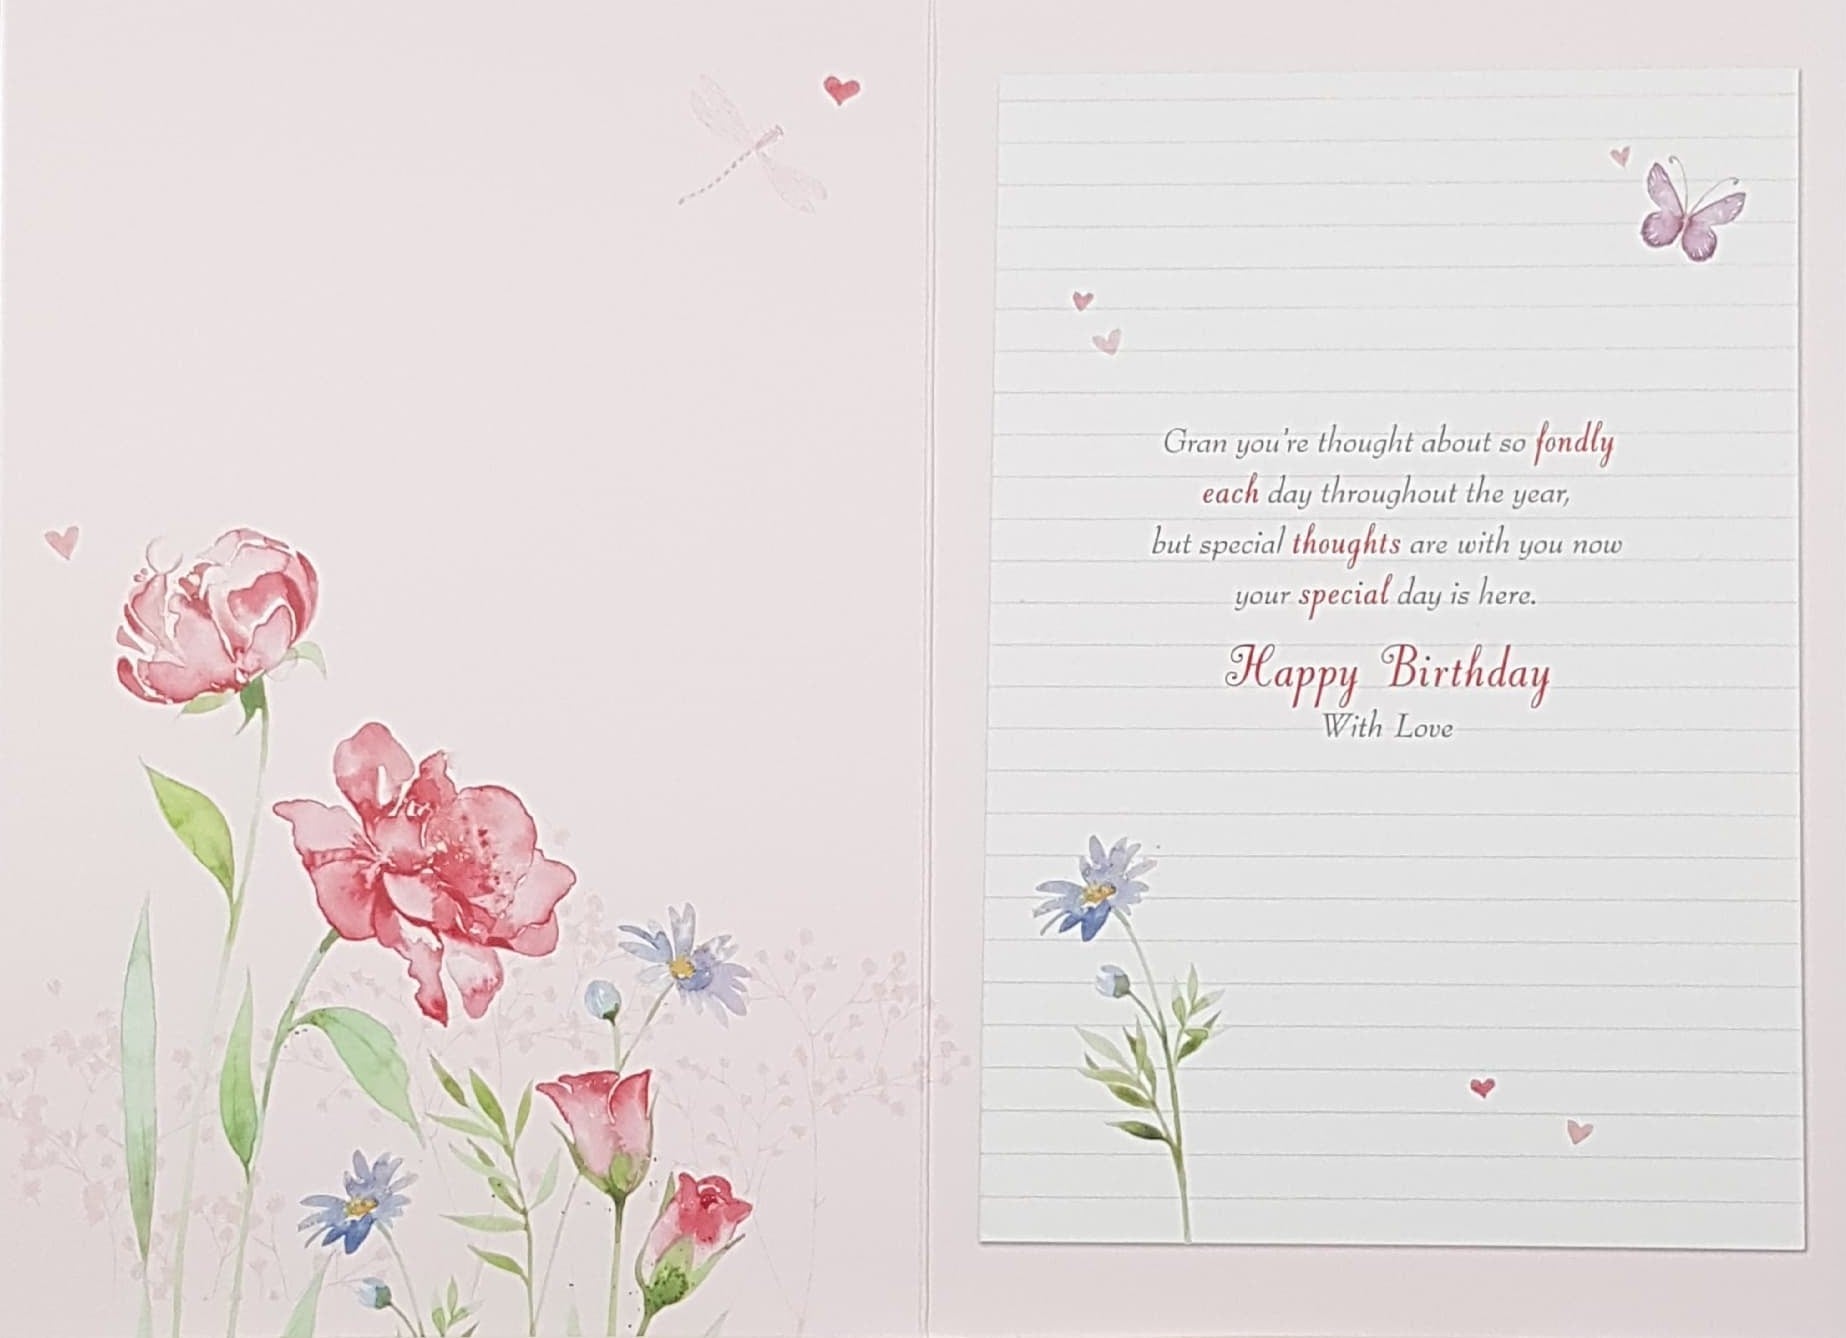 Birthday Card - Gran / 'With Love On Your Birthday' & White Butterflies